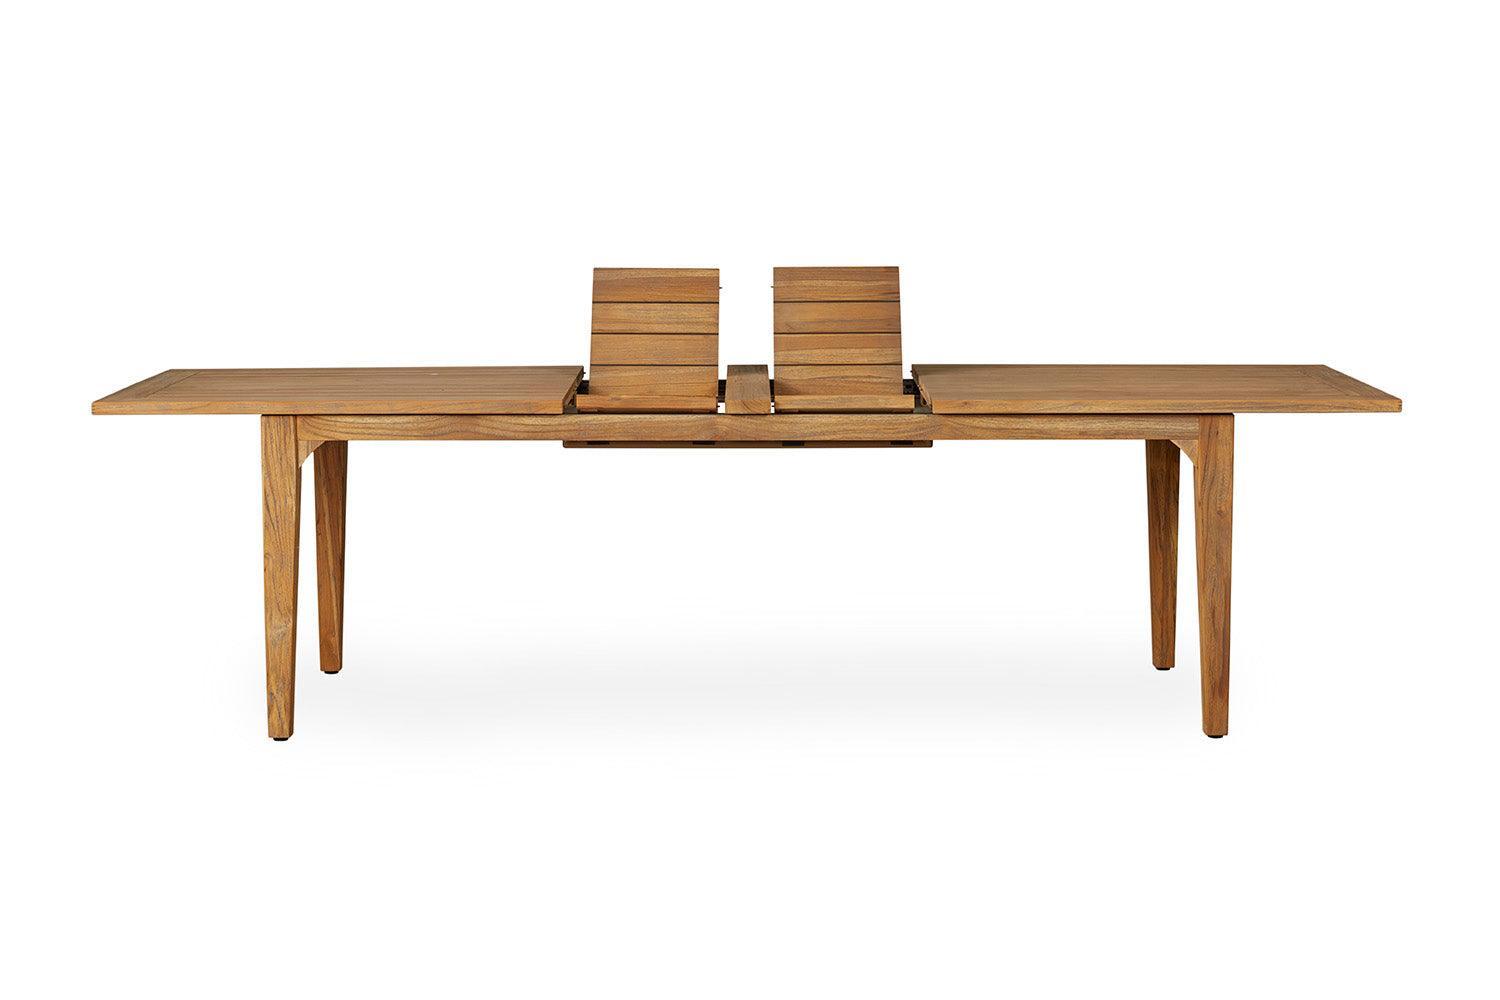 Hamptons Teak Extendable Dining Table Set with Wicker Dining Chairs - Uptown Sebastian